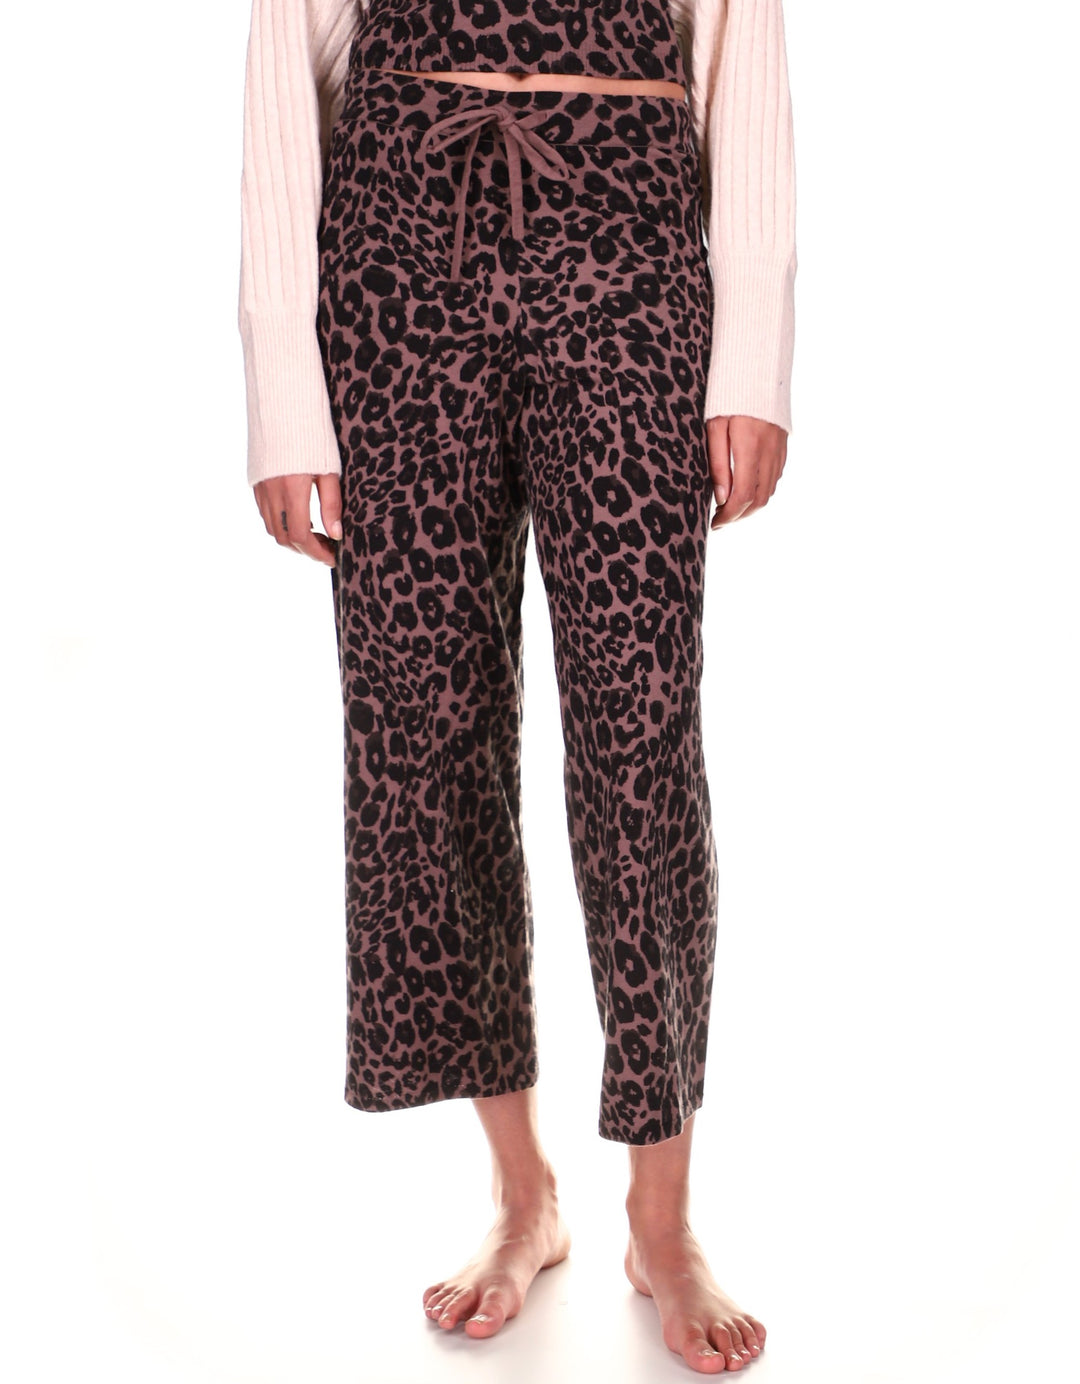 CLASSY MINK ESSENTIAL KNITWEAR PANT - Kingfisher Road - Online Boutique